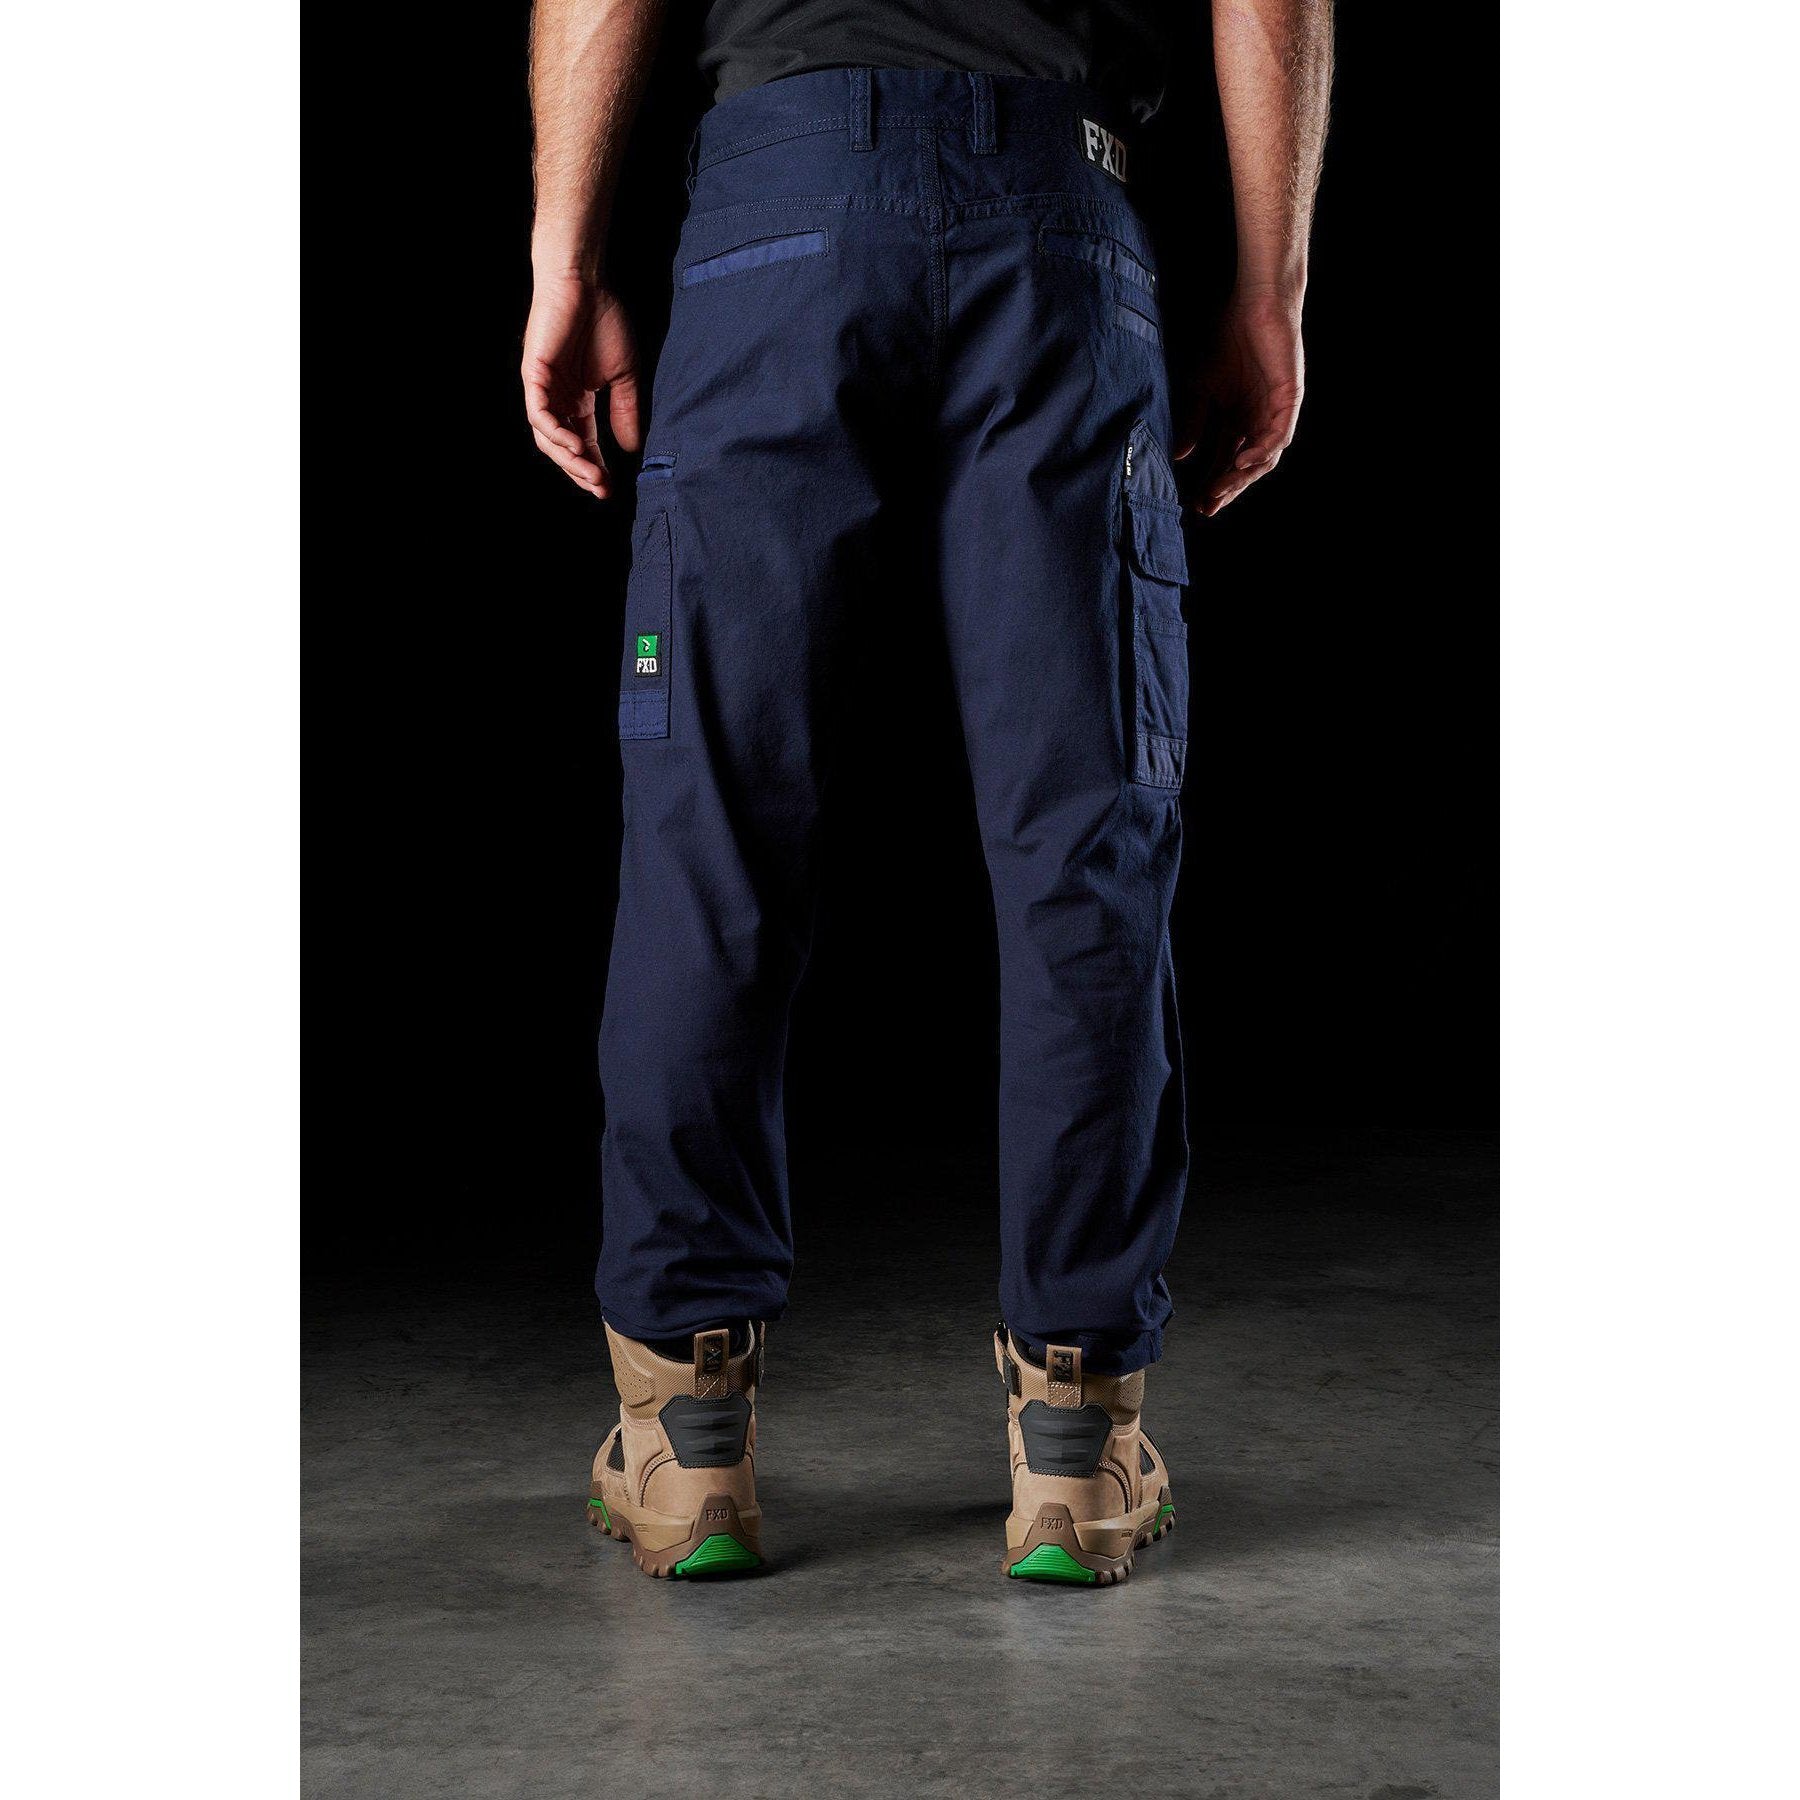 Buy FXD Stretch Canvas Work Pants - WP-3 Online